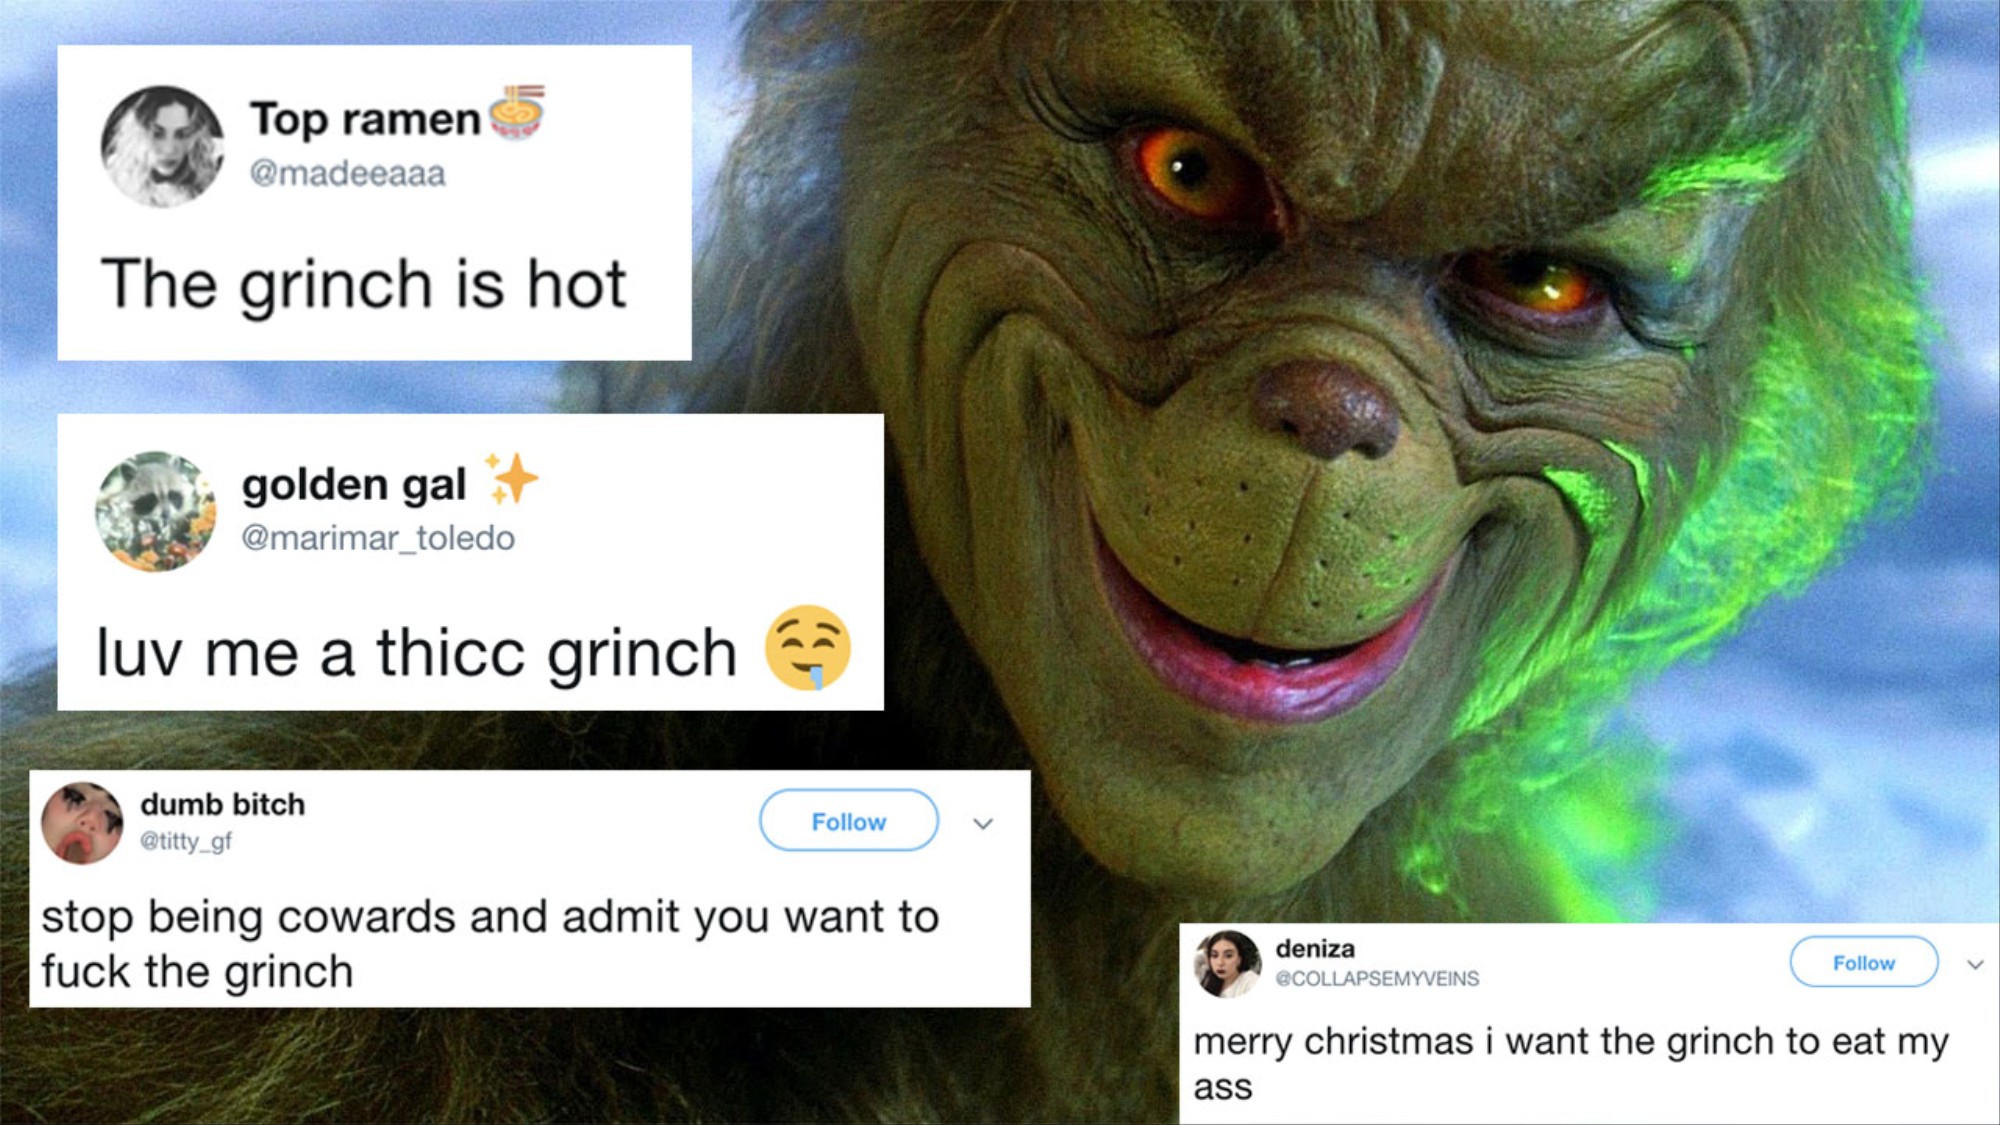 Furry Anilingus Porn - People Want to Fuck the Grinch - VICE